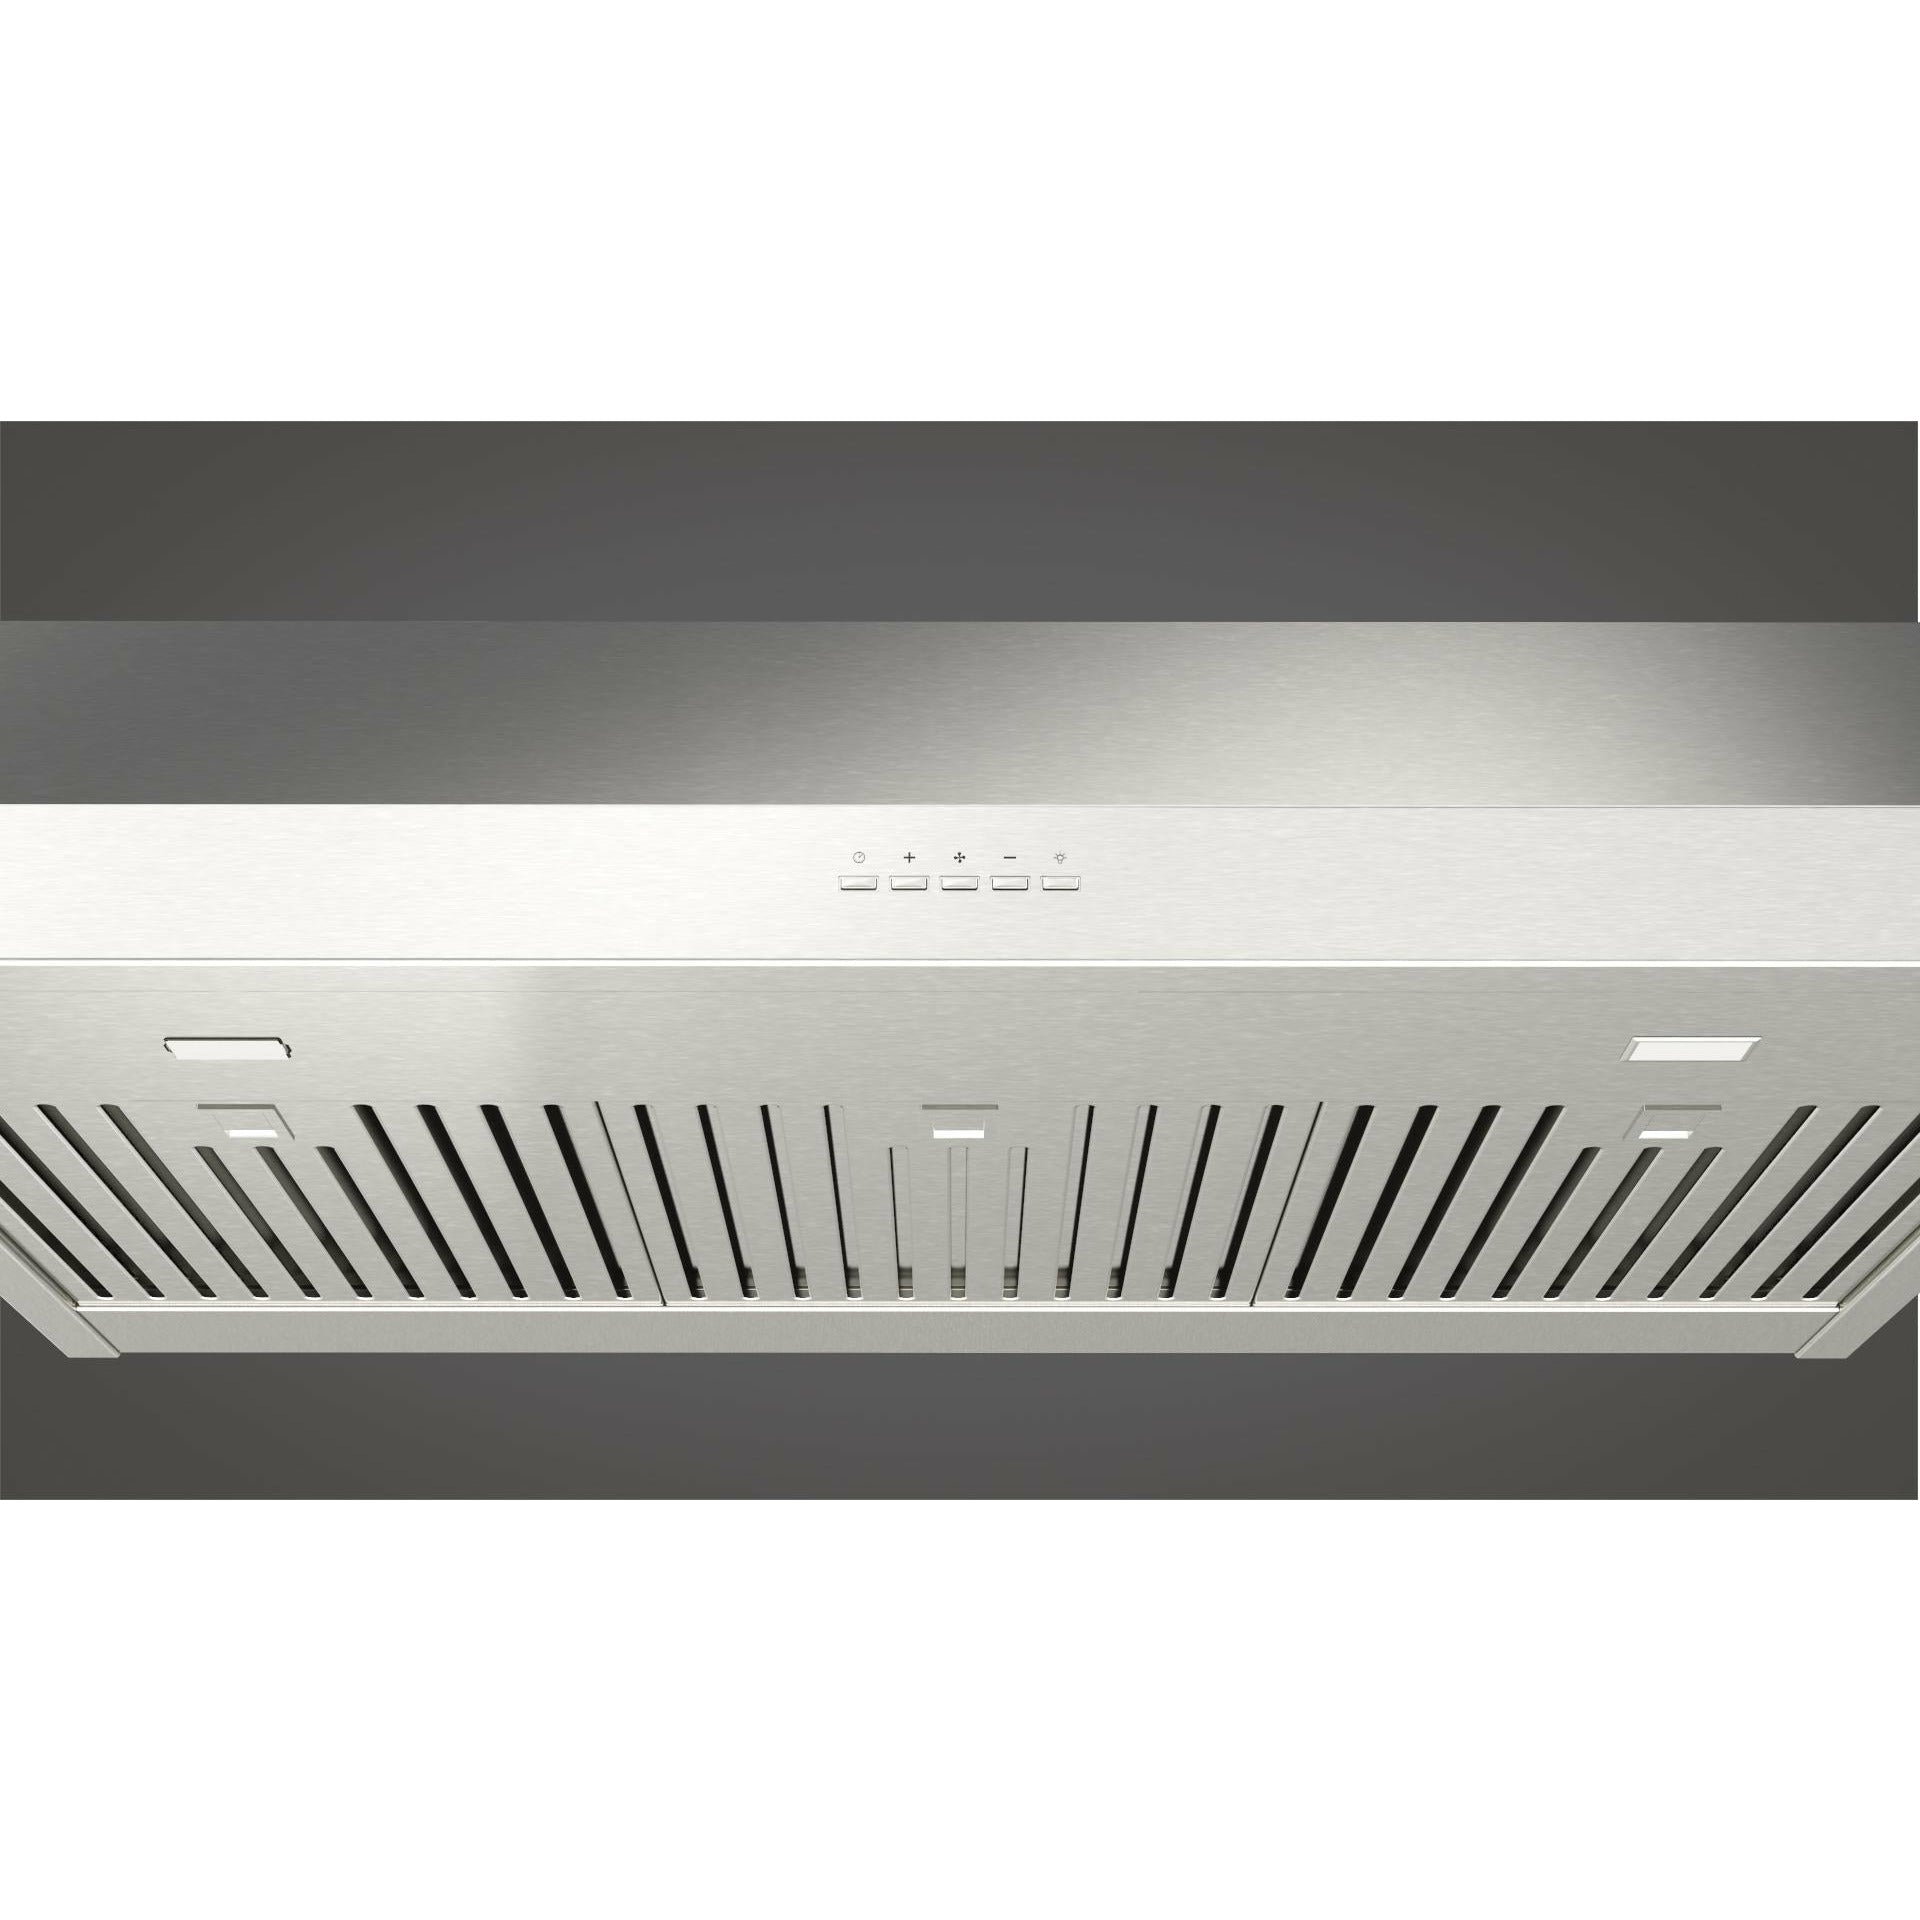 Fulgor Milano 36" Under Cabinet Range Hood with 4-Speed/450 CFM Blower, Stainless Steel - F4UC36S1